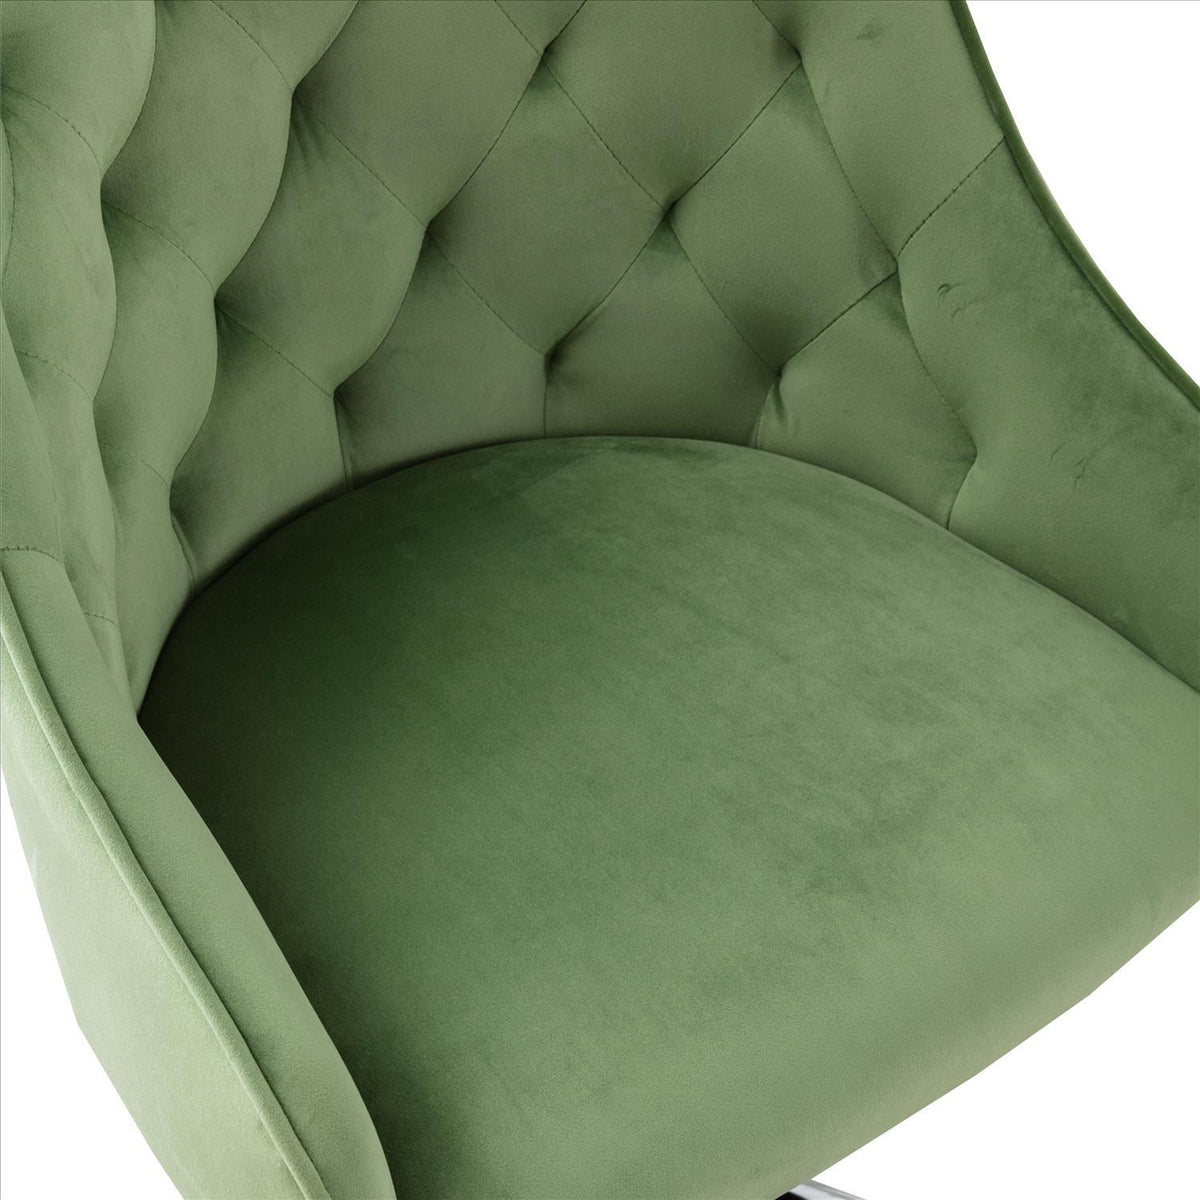 Office Chair with Padded Swivel Seat and Tufted Design, Green - BM261583